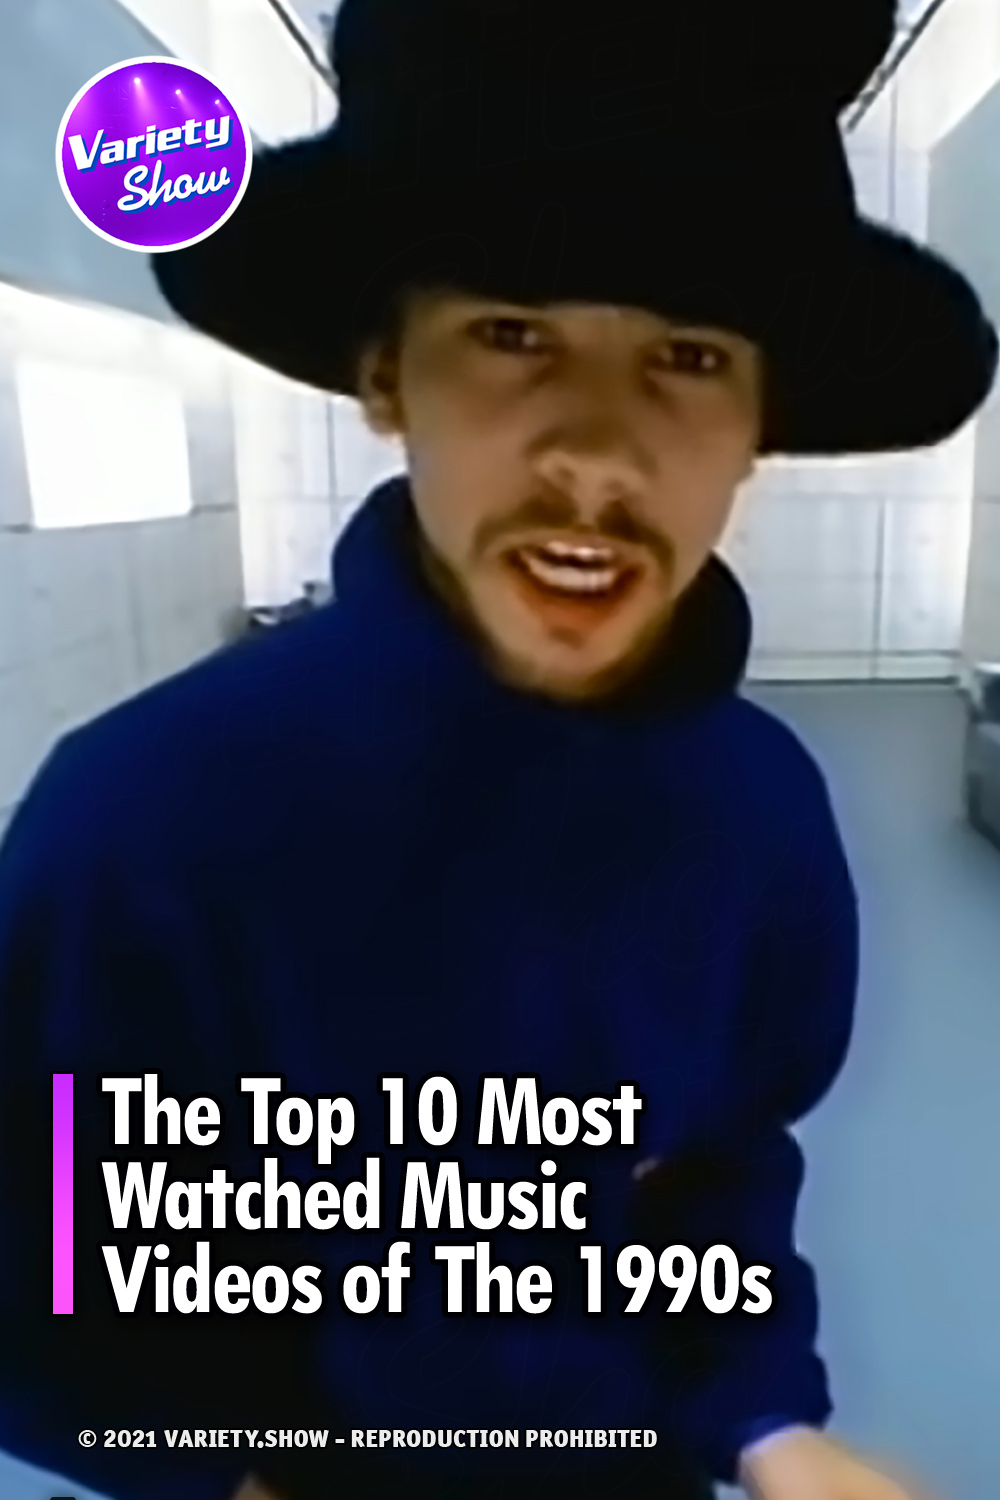 The Top 10 Most Watched Music Videos of The 1990s